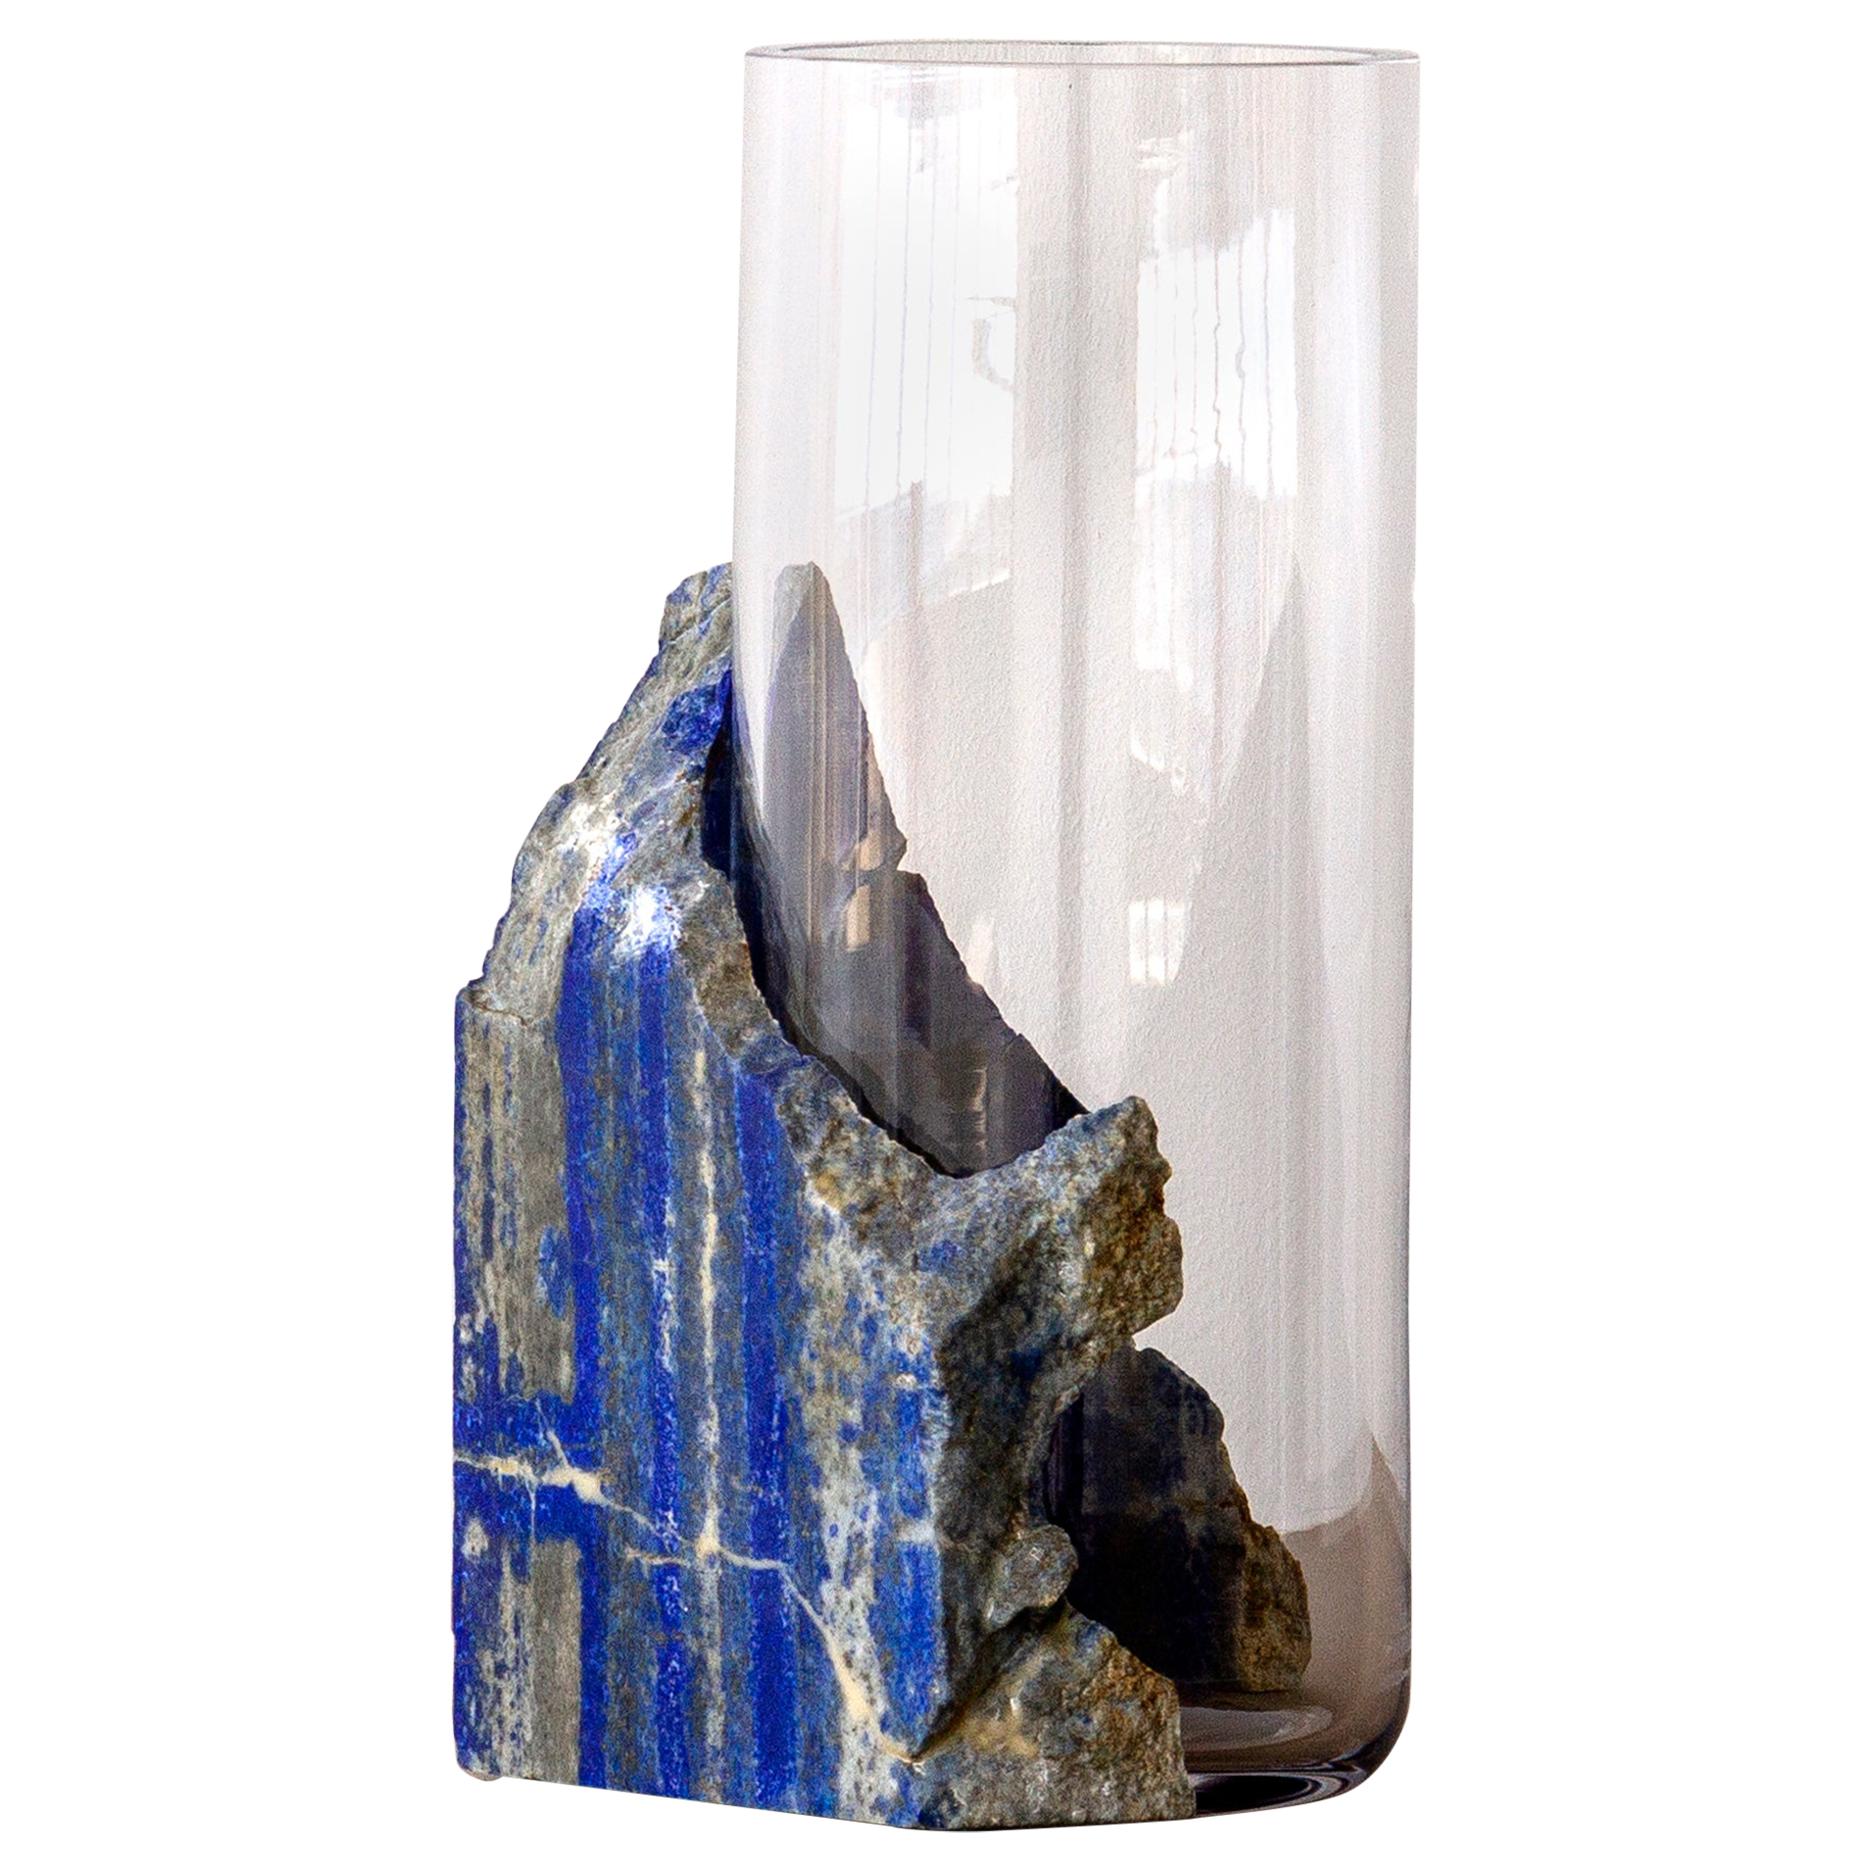 Contemporary Vase, Lapis Lazuli with Matching Glass Cylinder, by Erik Olovsson